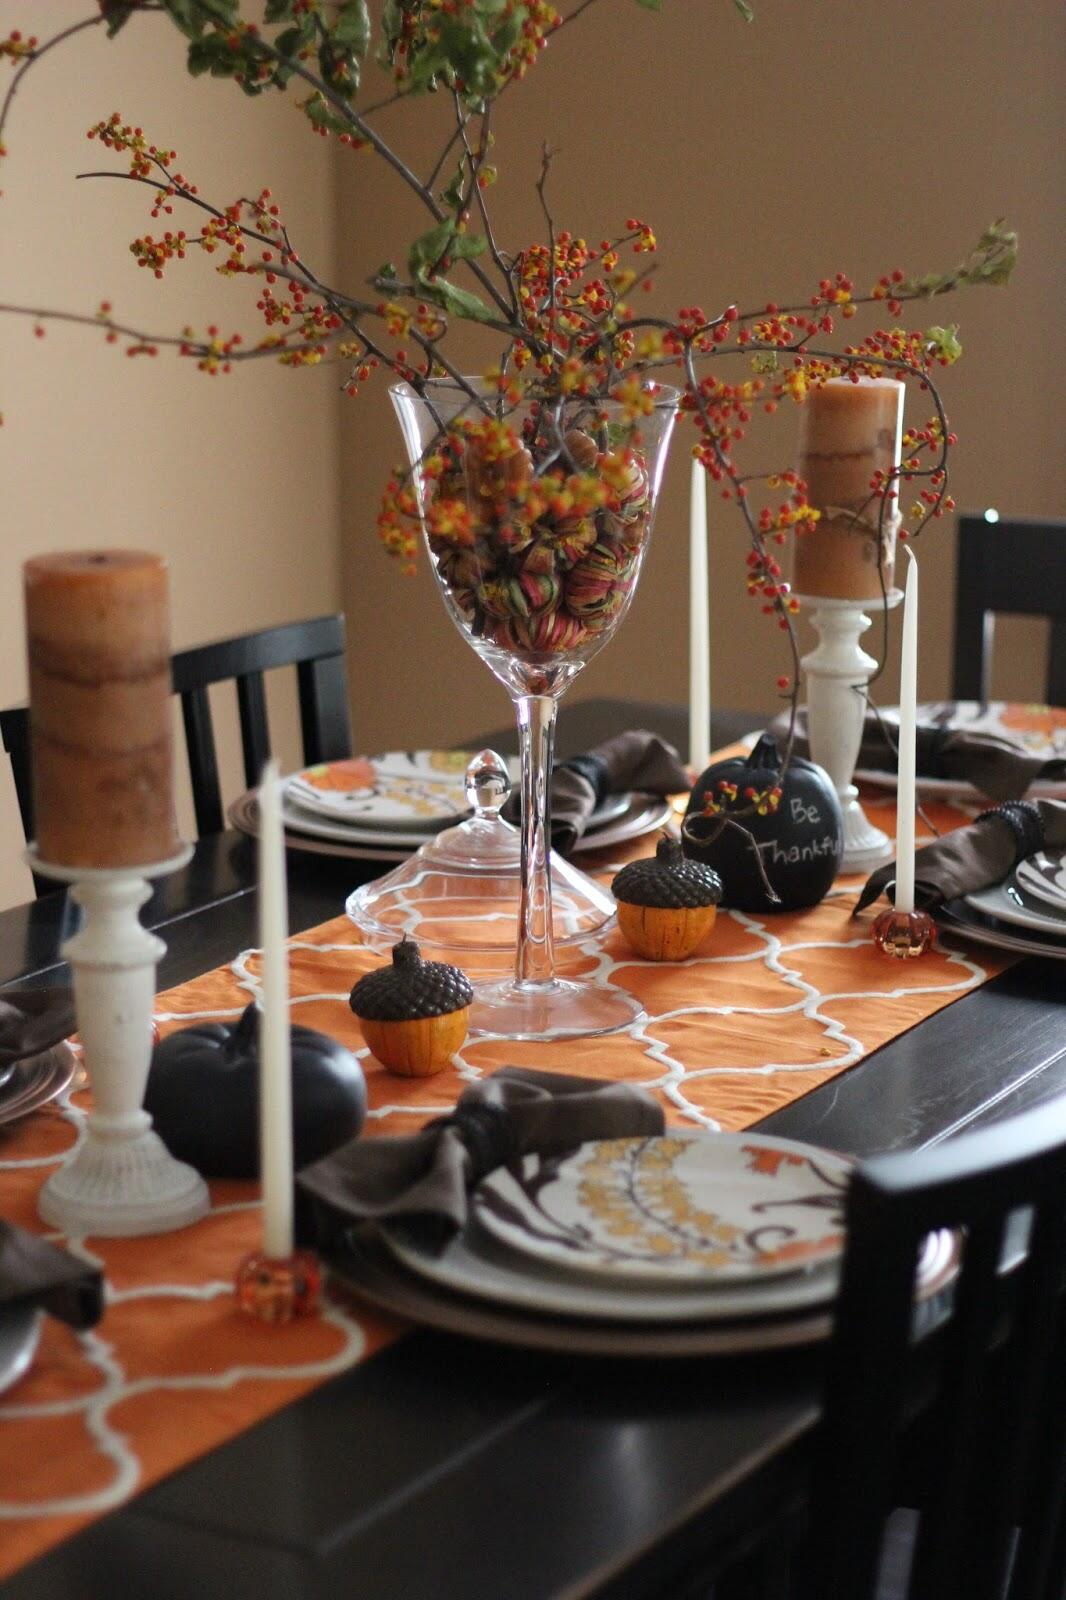 Thanksgiving Tablescape - How to Decorate for the Holidays by East Memphis blogger Walking in Memphis in High Heels